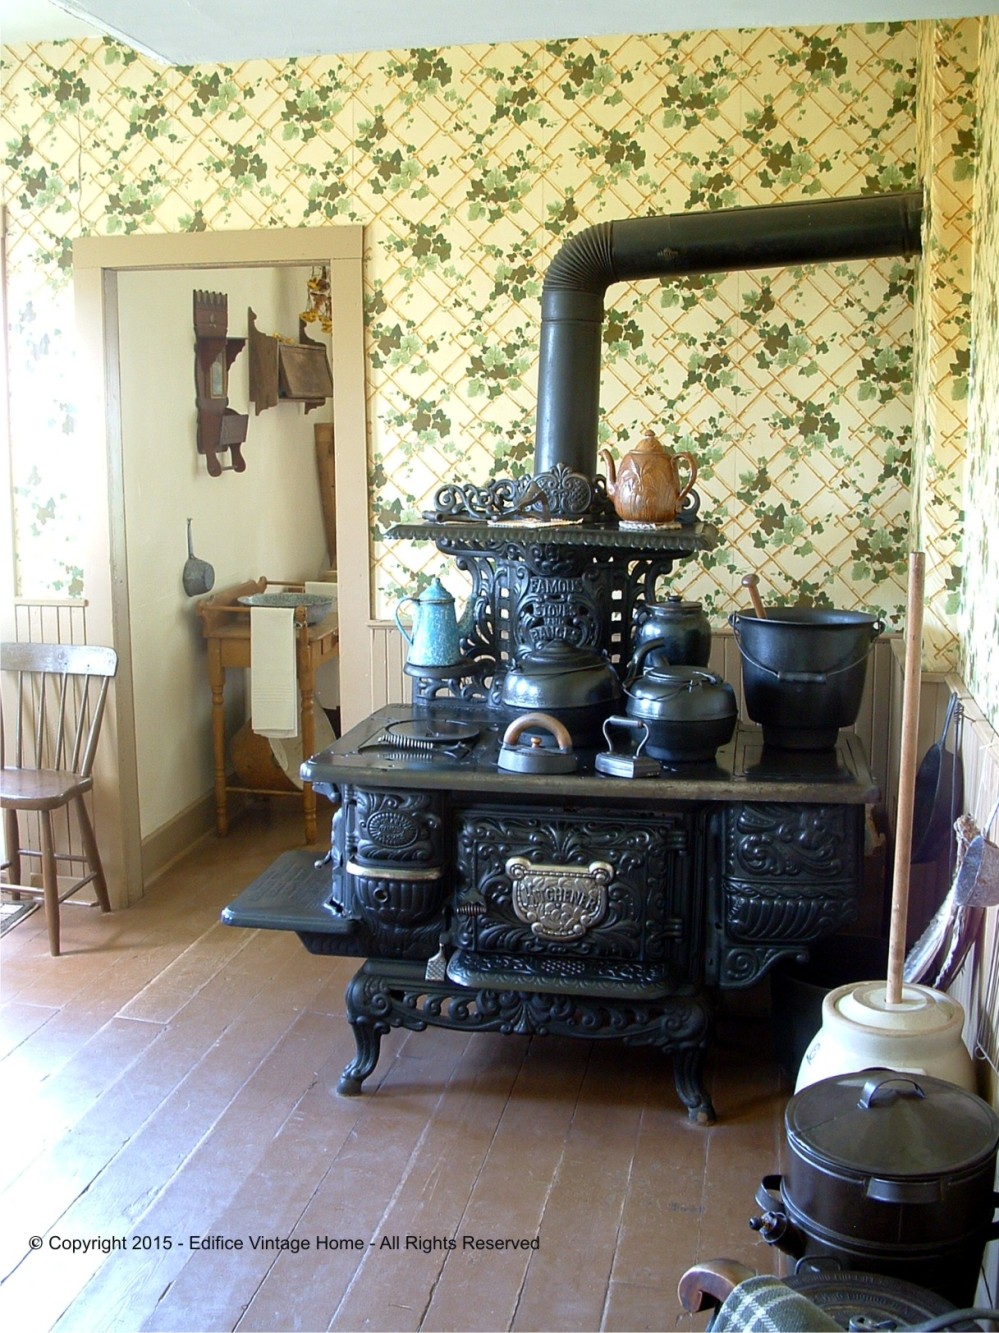 10 of the Prettiest Antique Cook Ranges – Art Cast in Iron, a LookBook –  Old Home Living